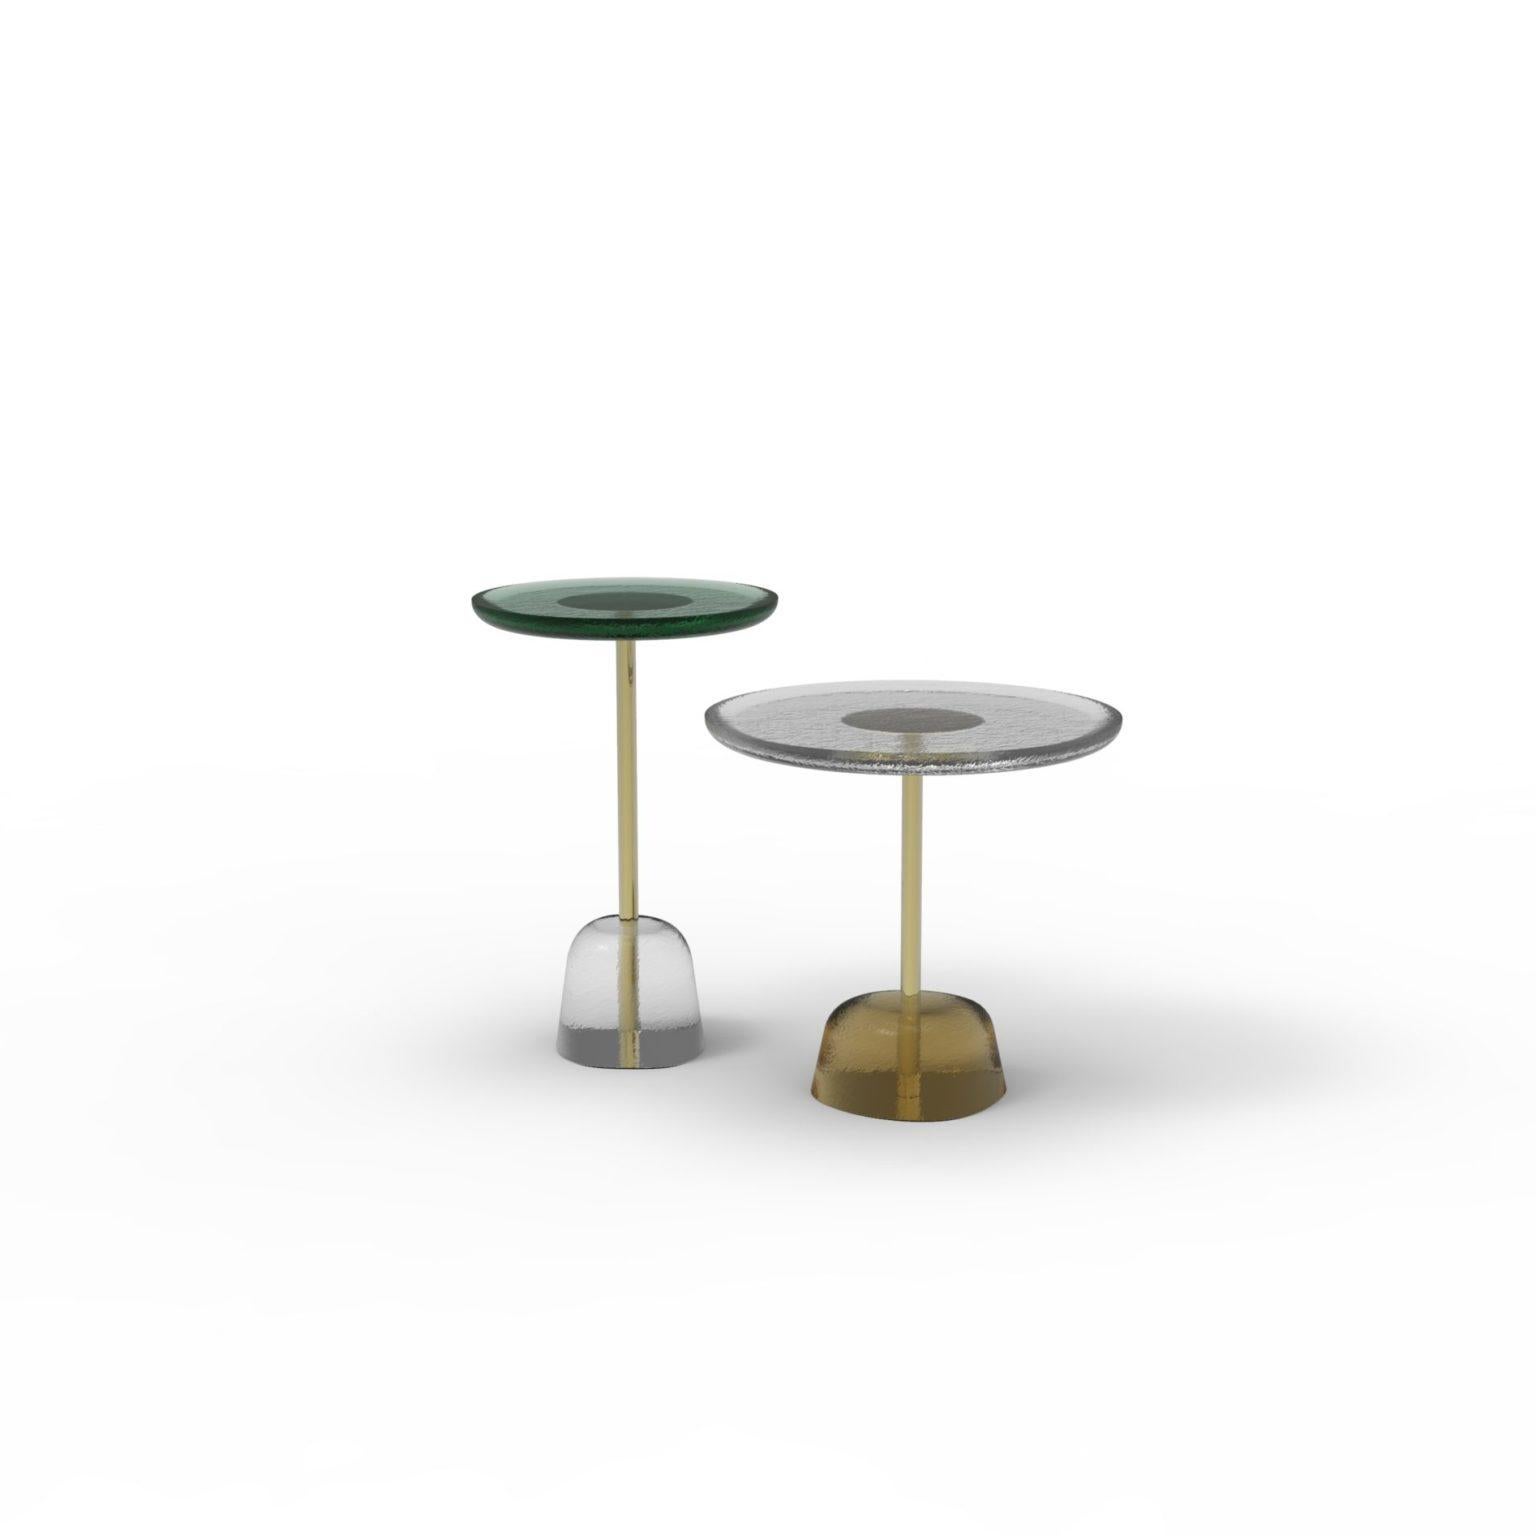 Hand-Crafted Pina Side Table, European, Minimalist, Green, Brass Base, German, Table